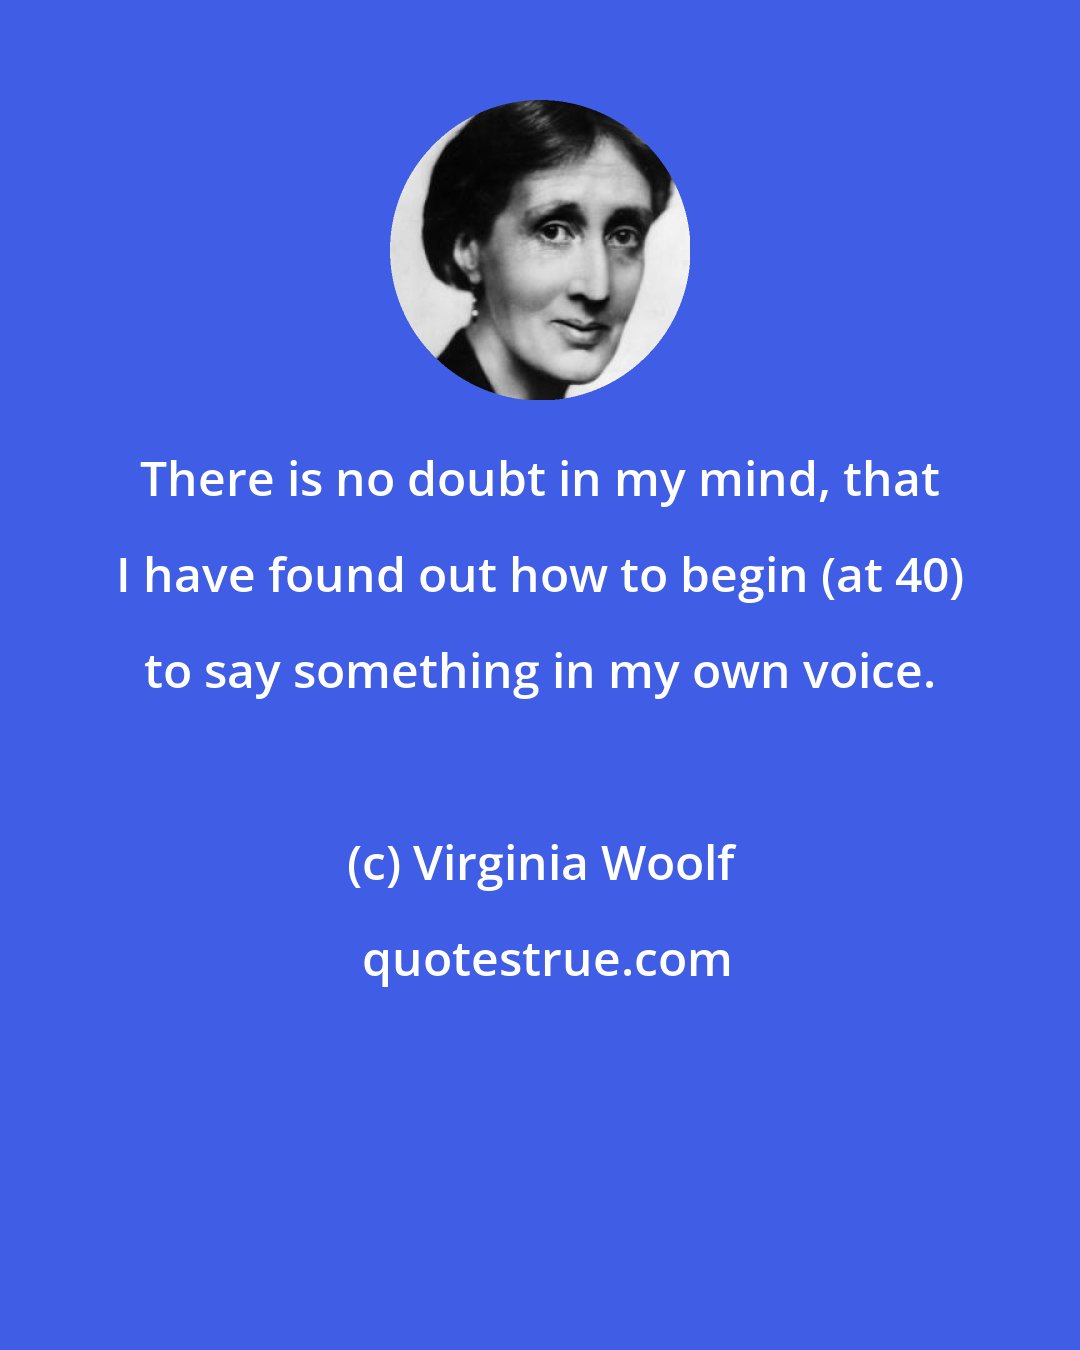 Virginia Woolf: There is no doubt in my mind, that I have found out how to begin (at 40) to say something in my own voice.